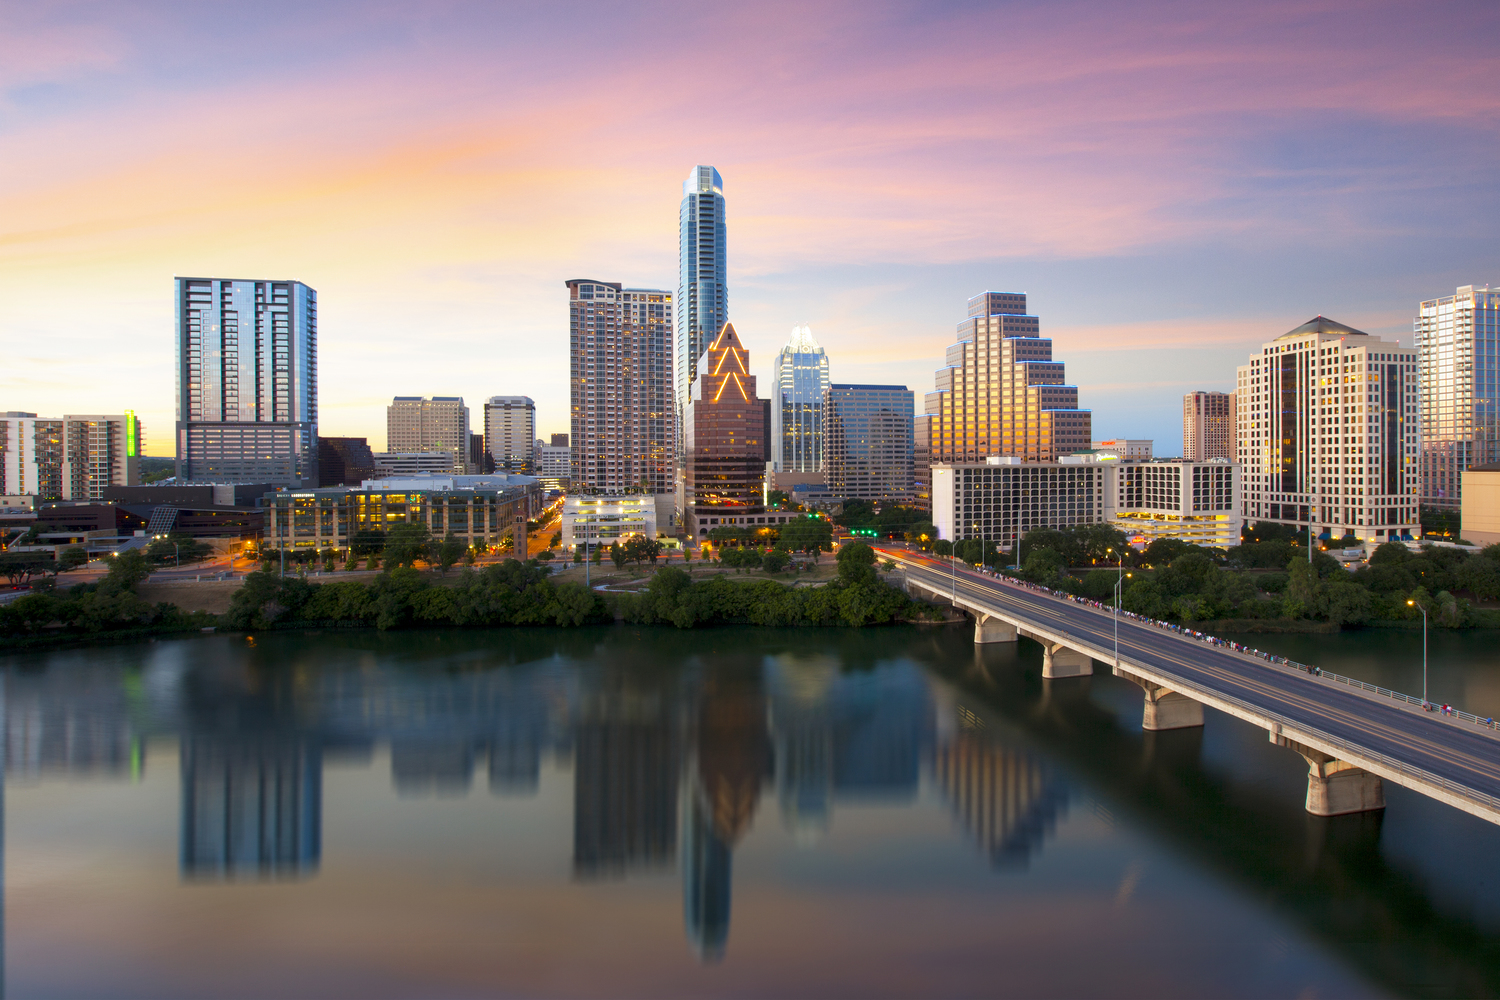 From the top floor of the Hyatt on Ladybird Lake, this Austin Skyline Picture was captured at sunset. Prominently displayed are the Austonian (the tallest building in Austin) and the iconic Frost Tower. In the foreground is Town Lake and Congress Bridge.